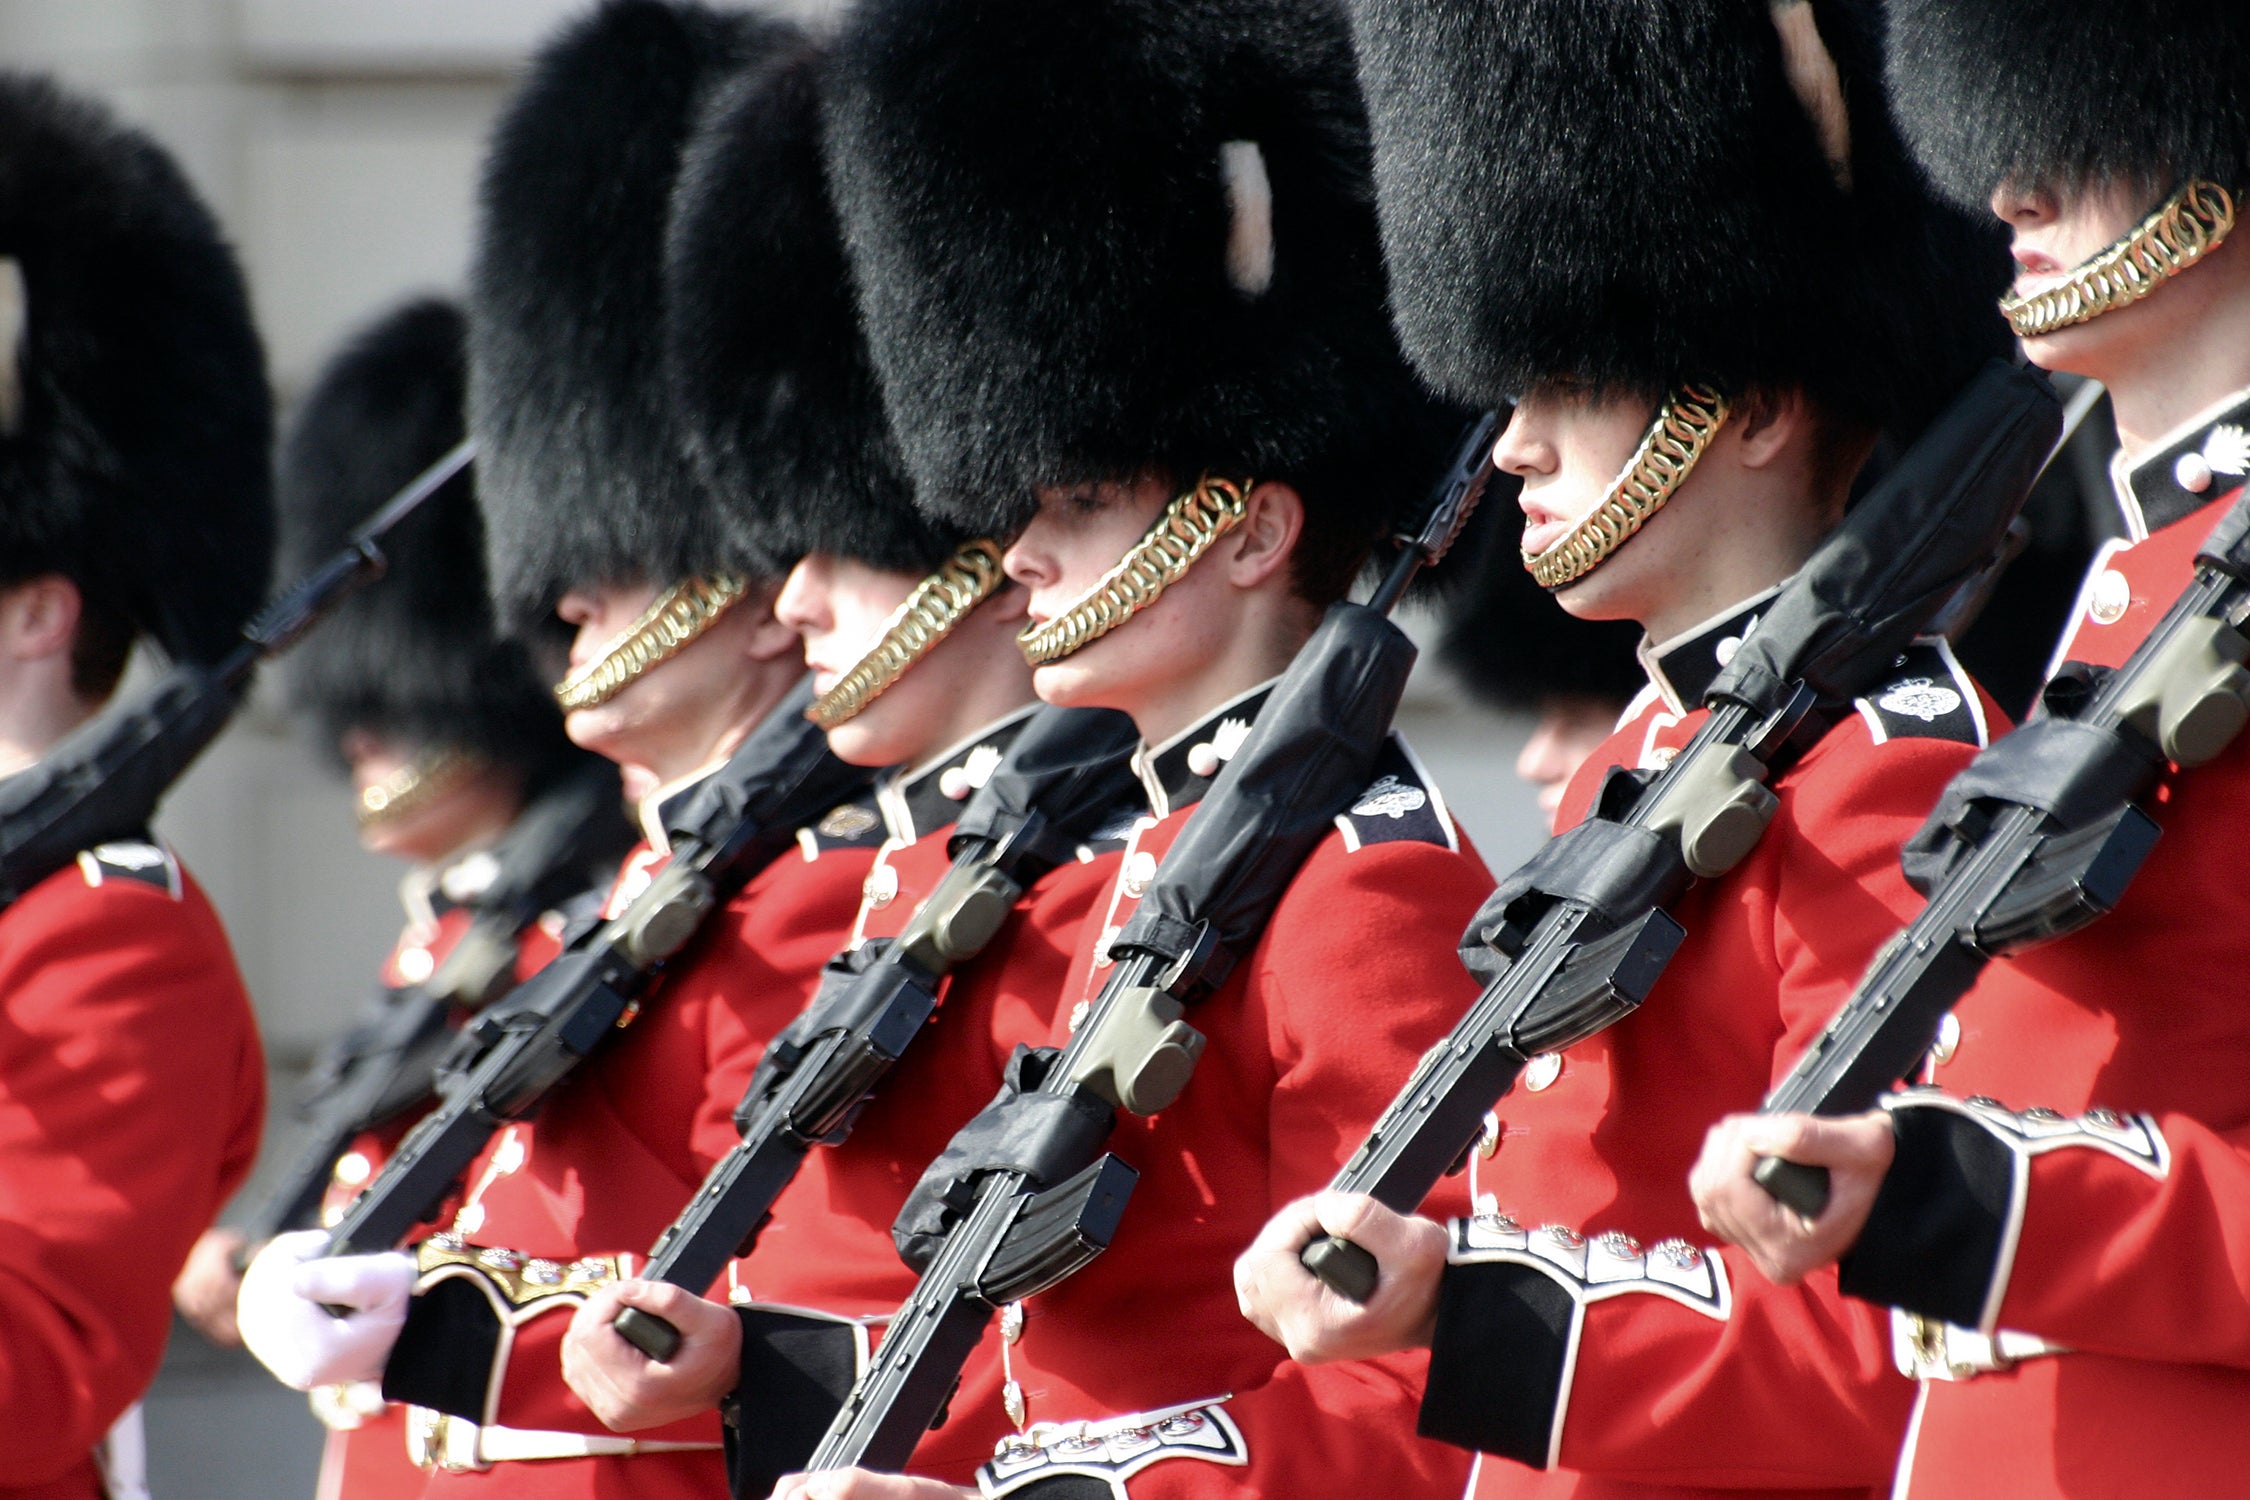 The ceremonial hats worn by guardsmen are made from Canadian bearskins